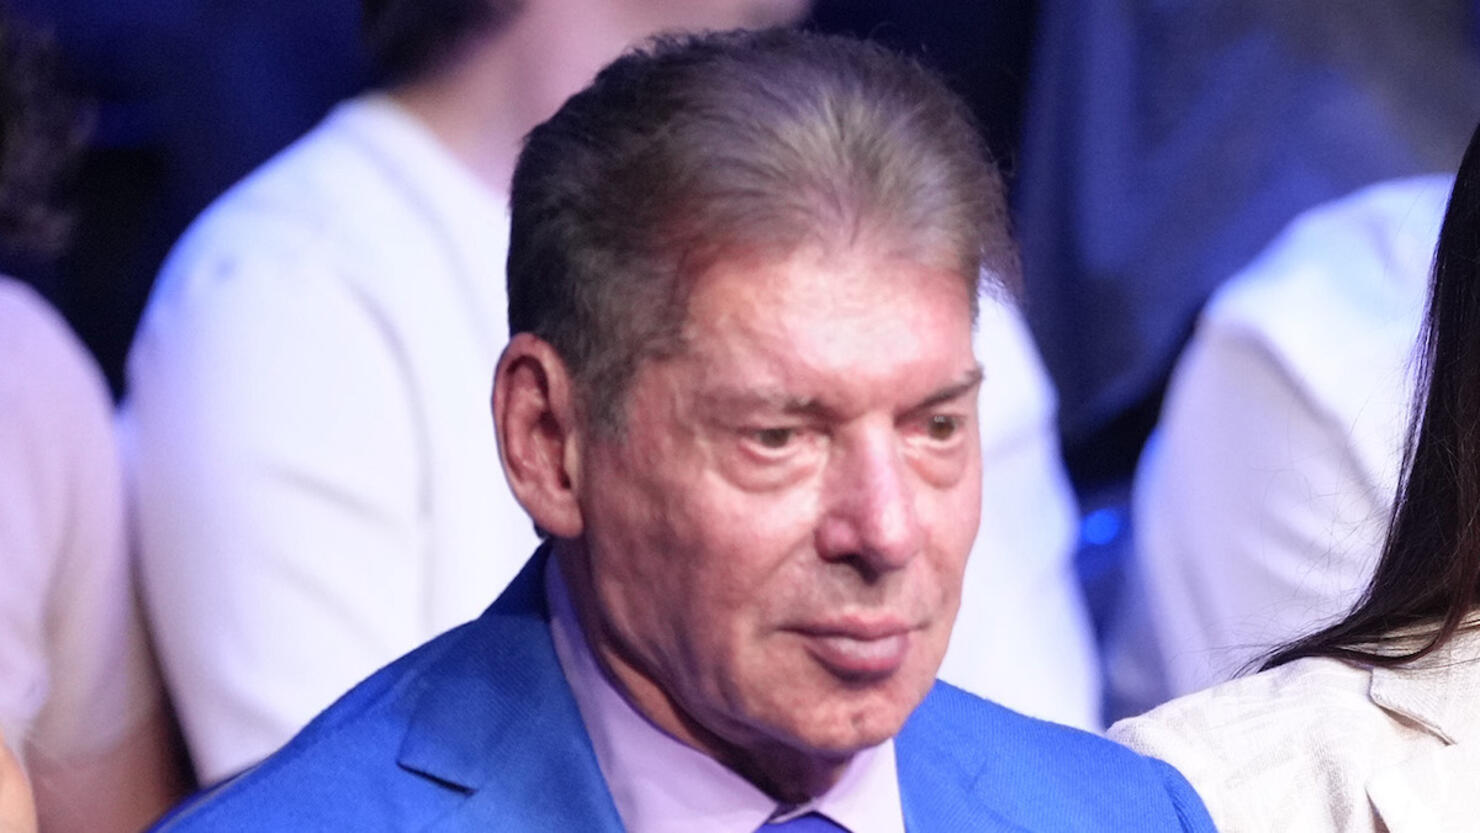 Former WWE Writer Sues Vince McMahon and Others Over Alleged